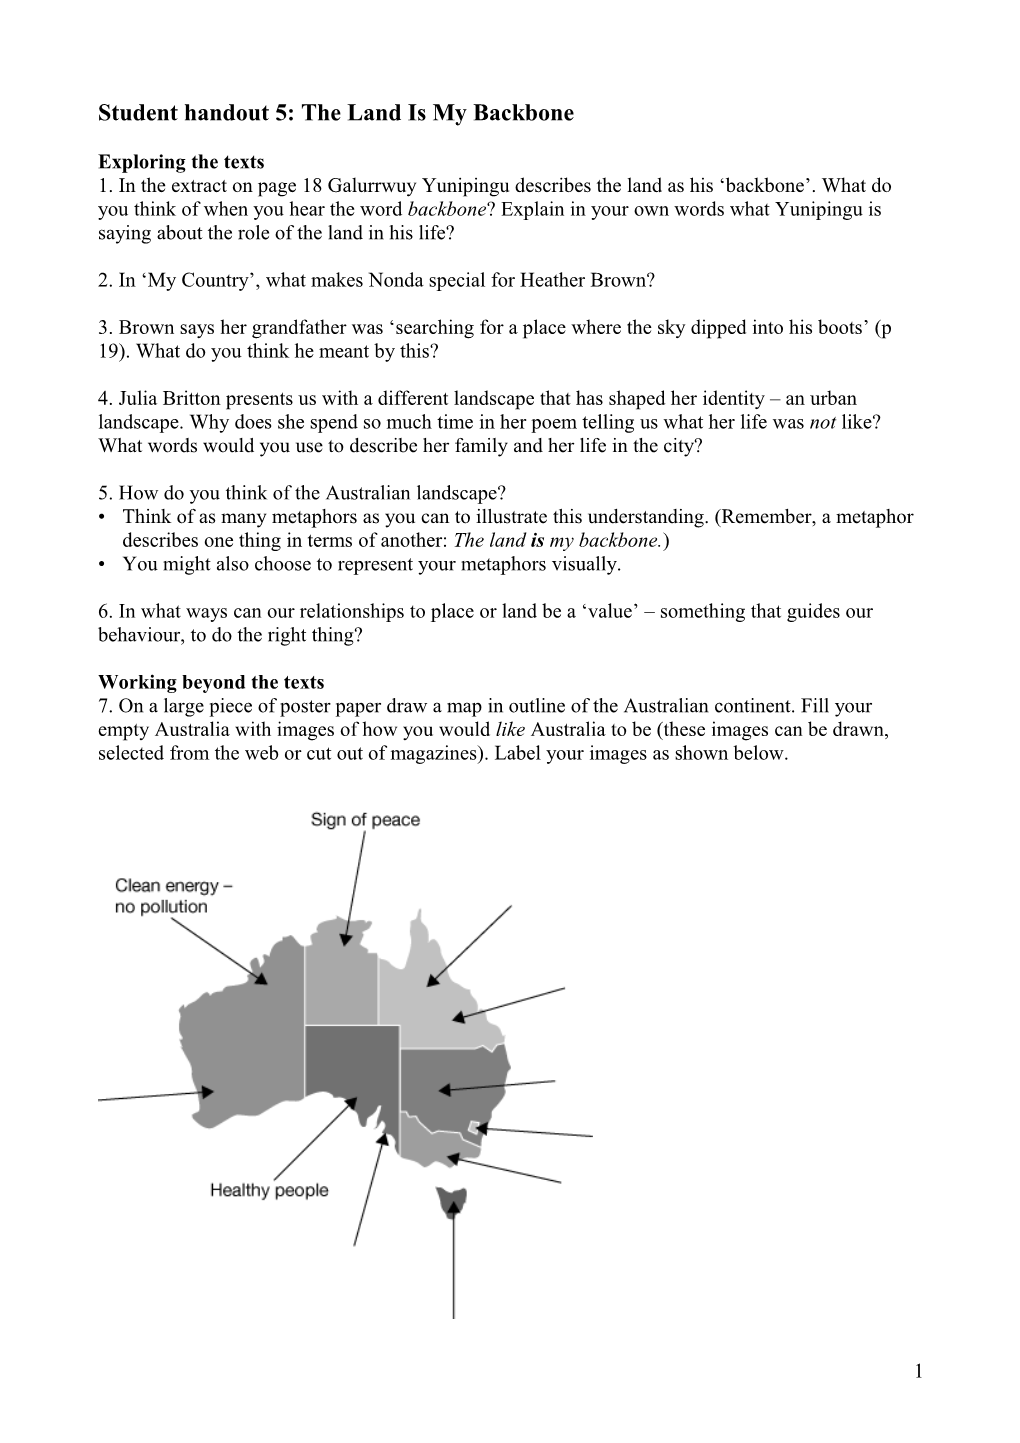 Student Handout 1: Introductory Activity